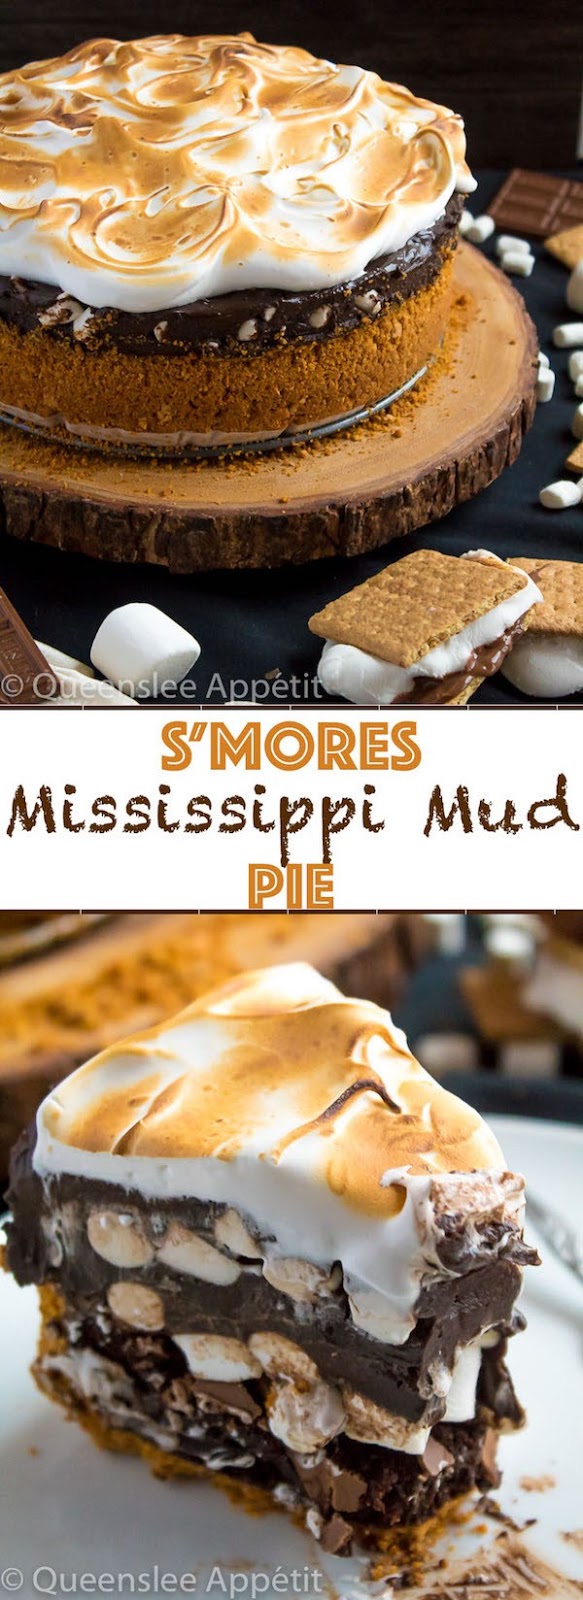 S’MORES MISSISSIPPI MUD PIE | Awesome Foods